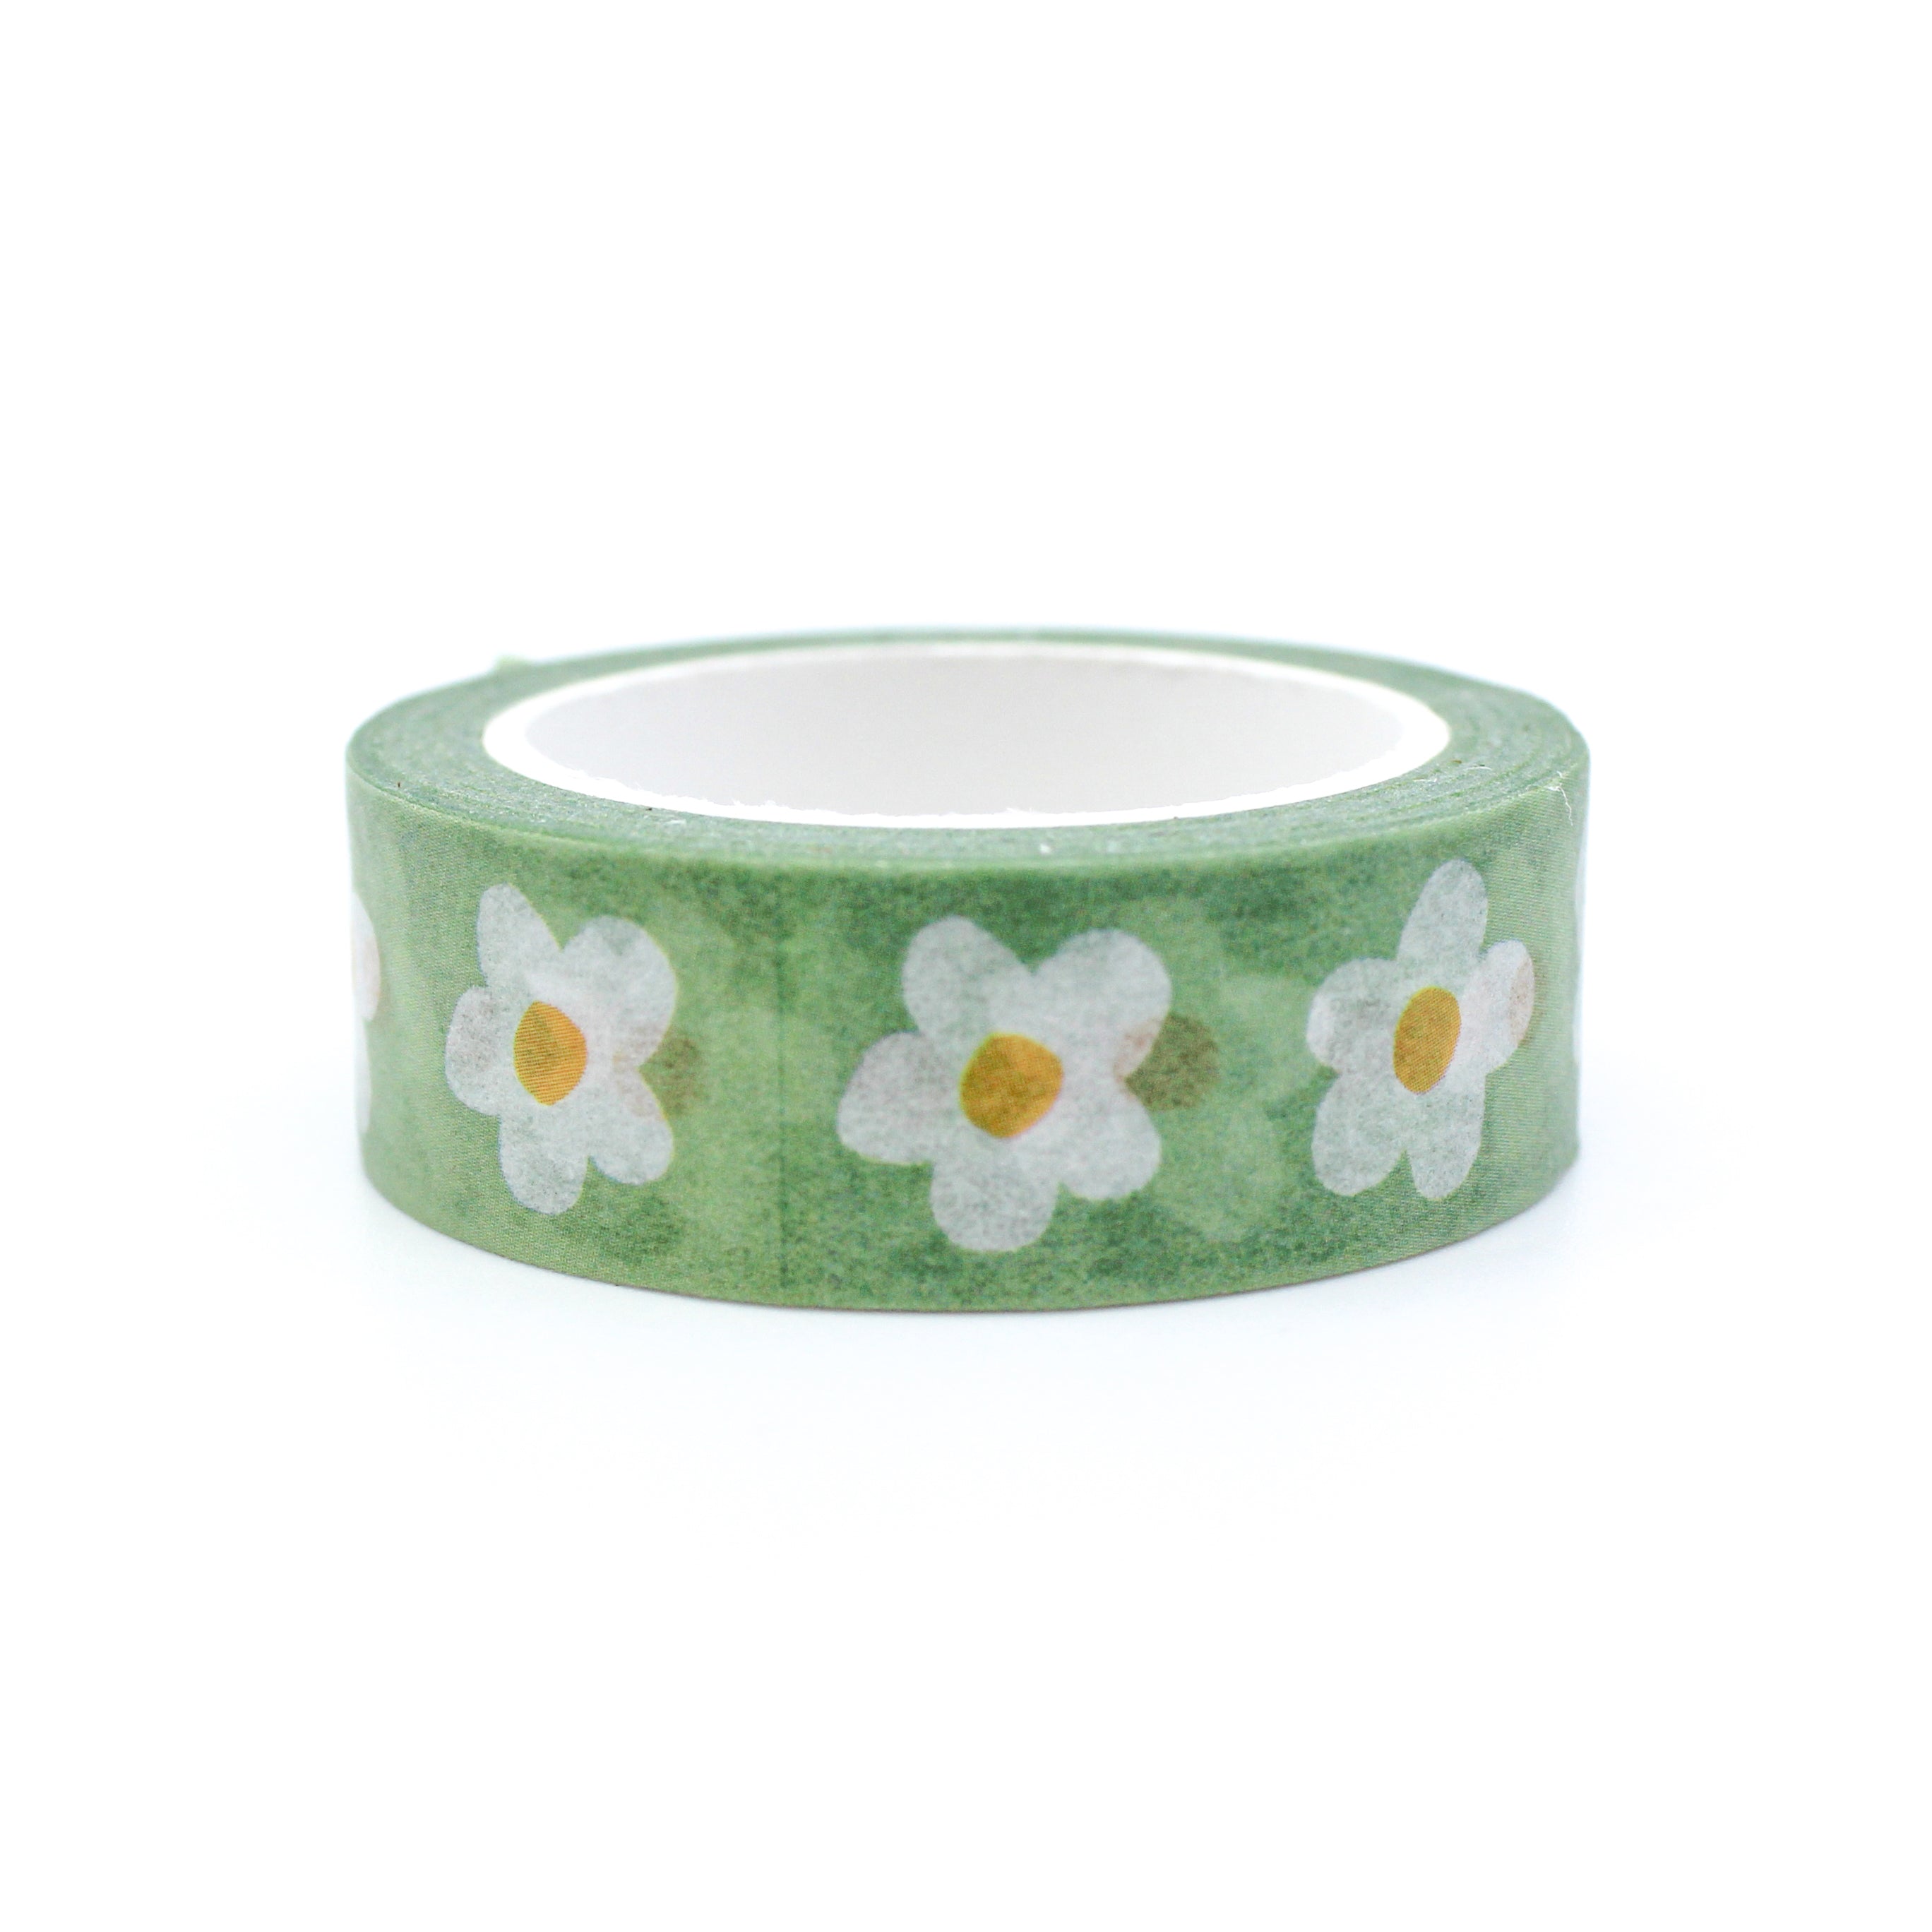 This is a green daisy flower child retro washi tape from BBB Supplies Craft Shop